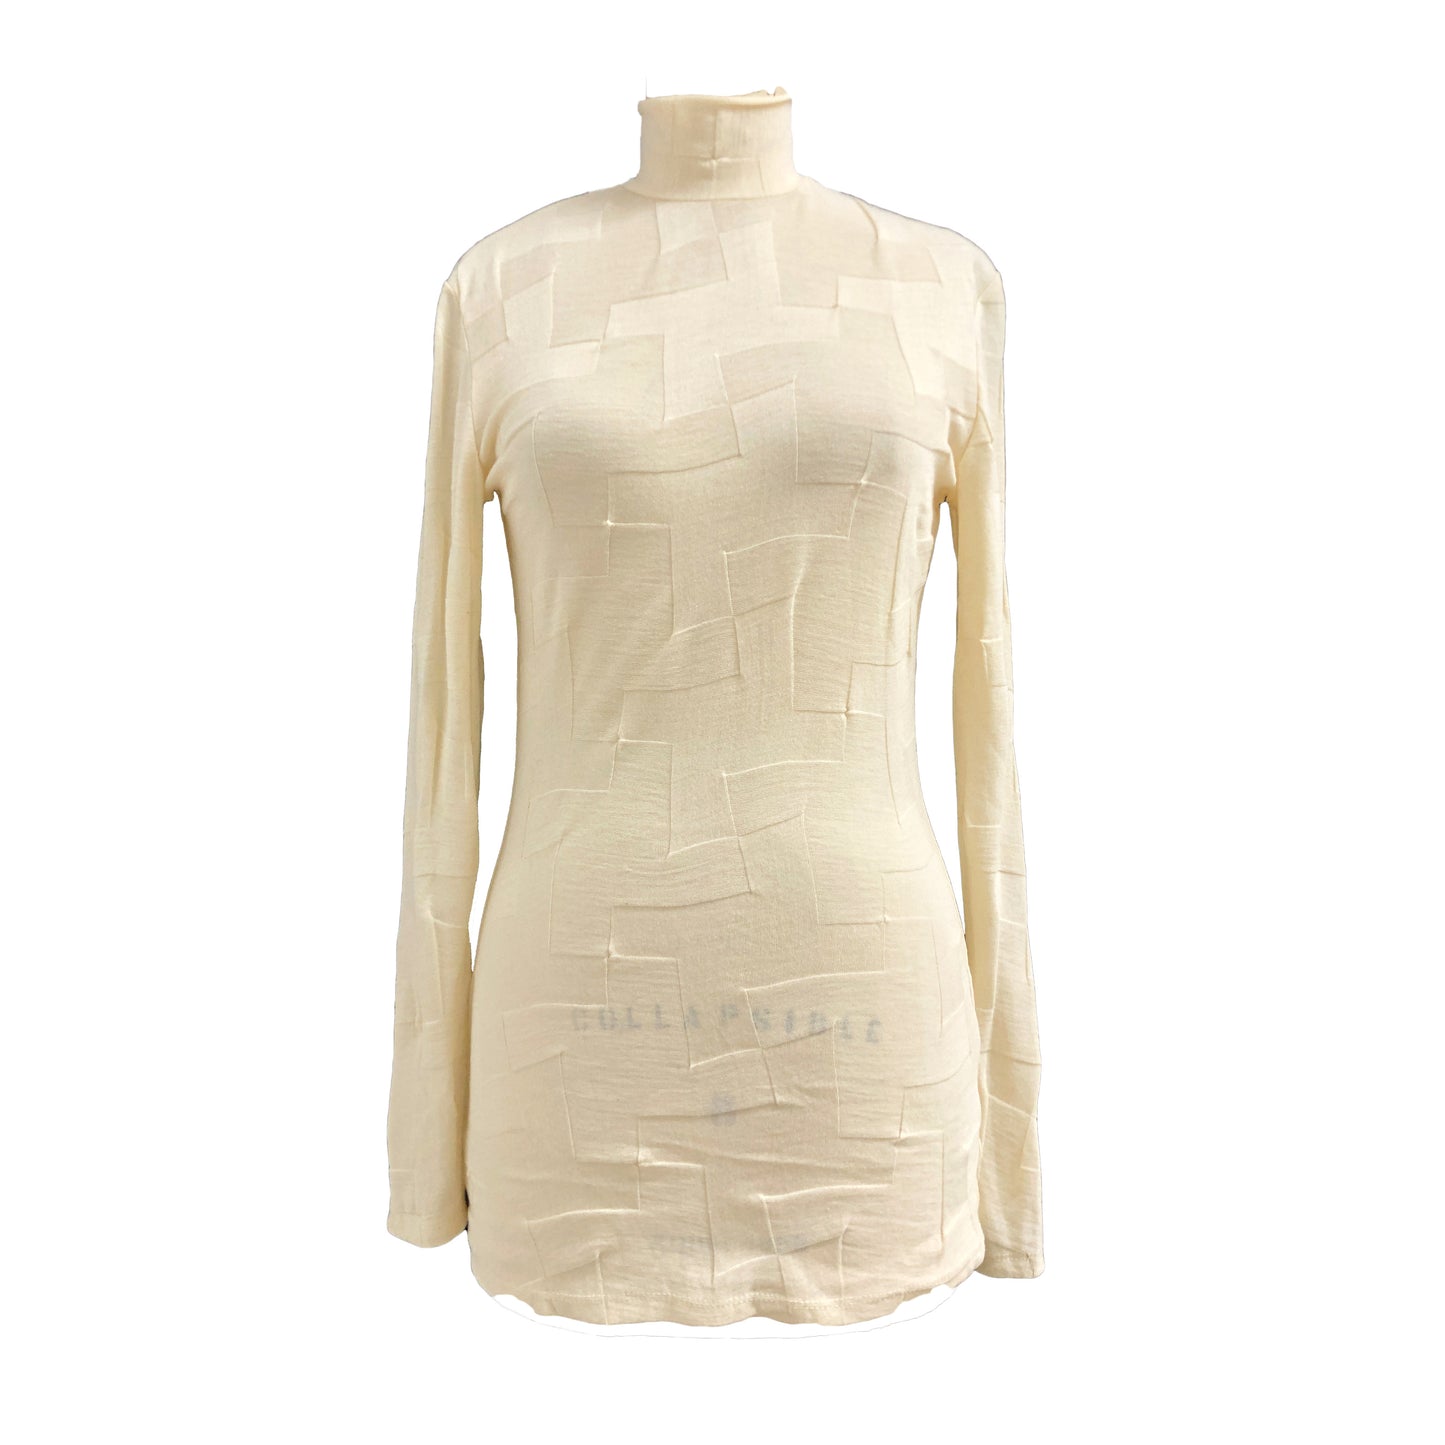 Ivory wool and elastane blend turtleneck with geometric patterns